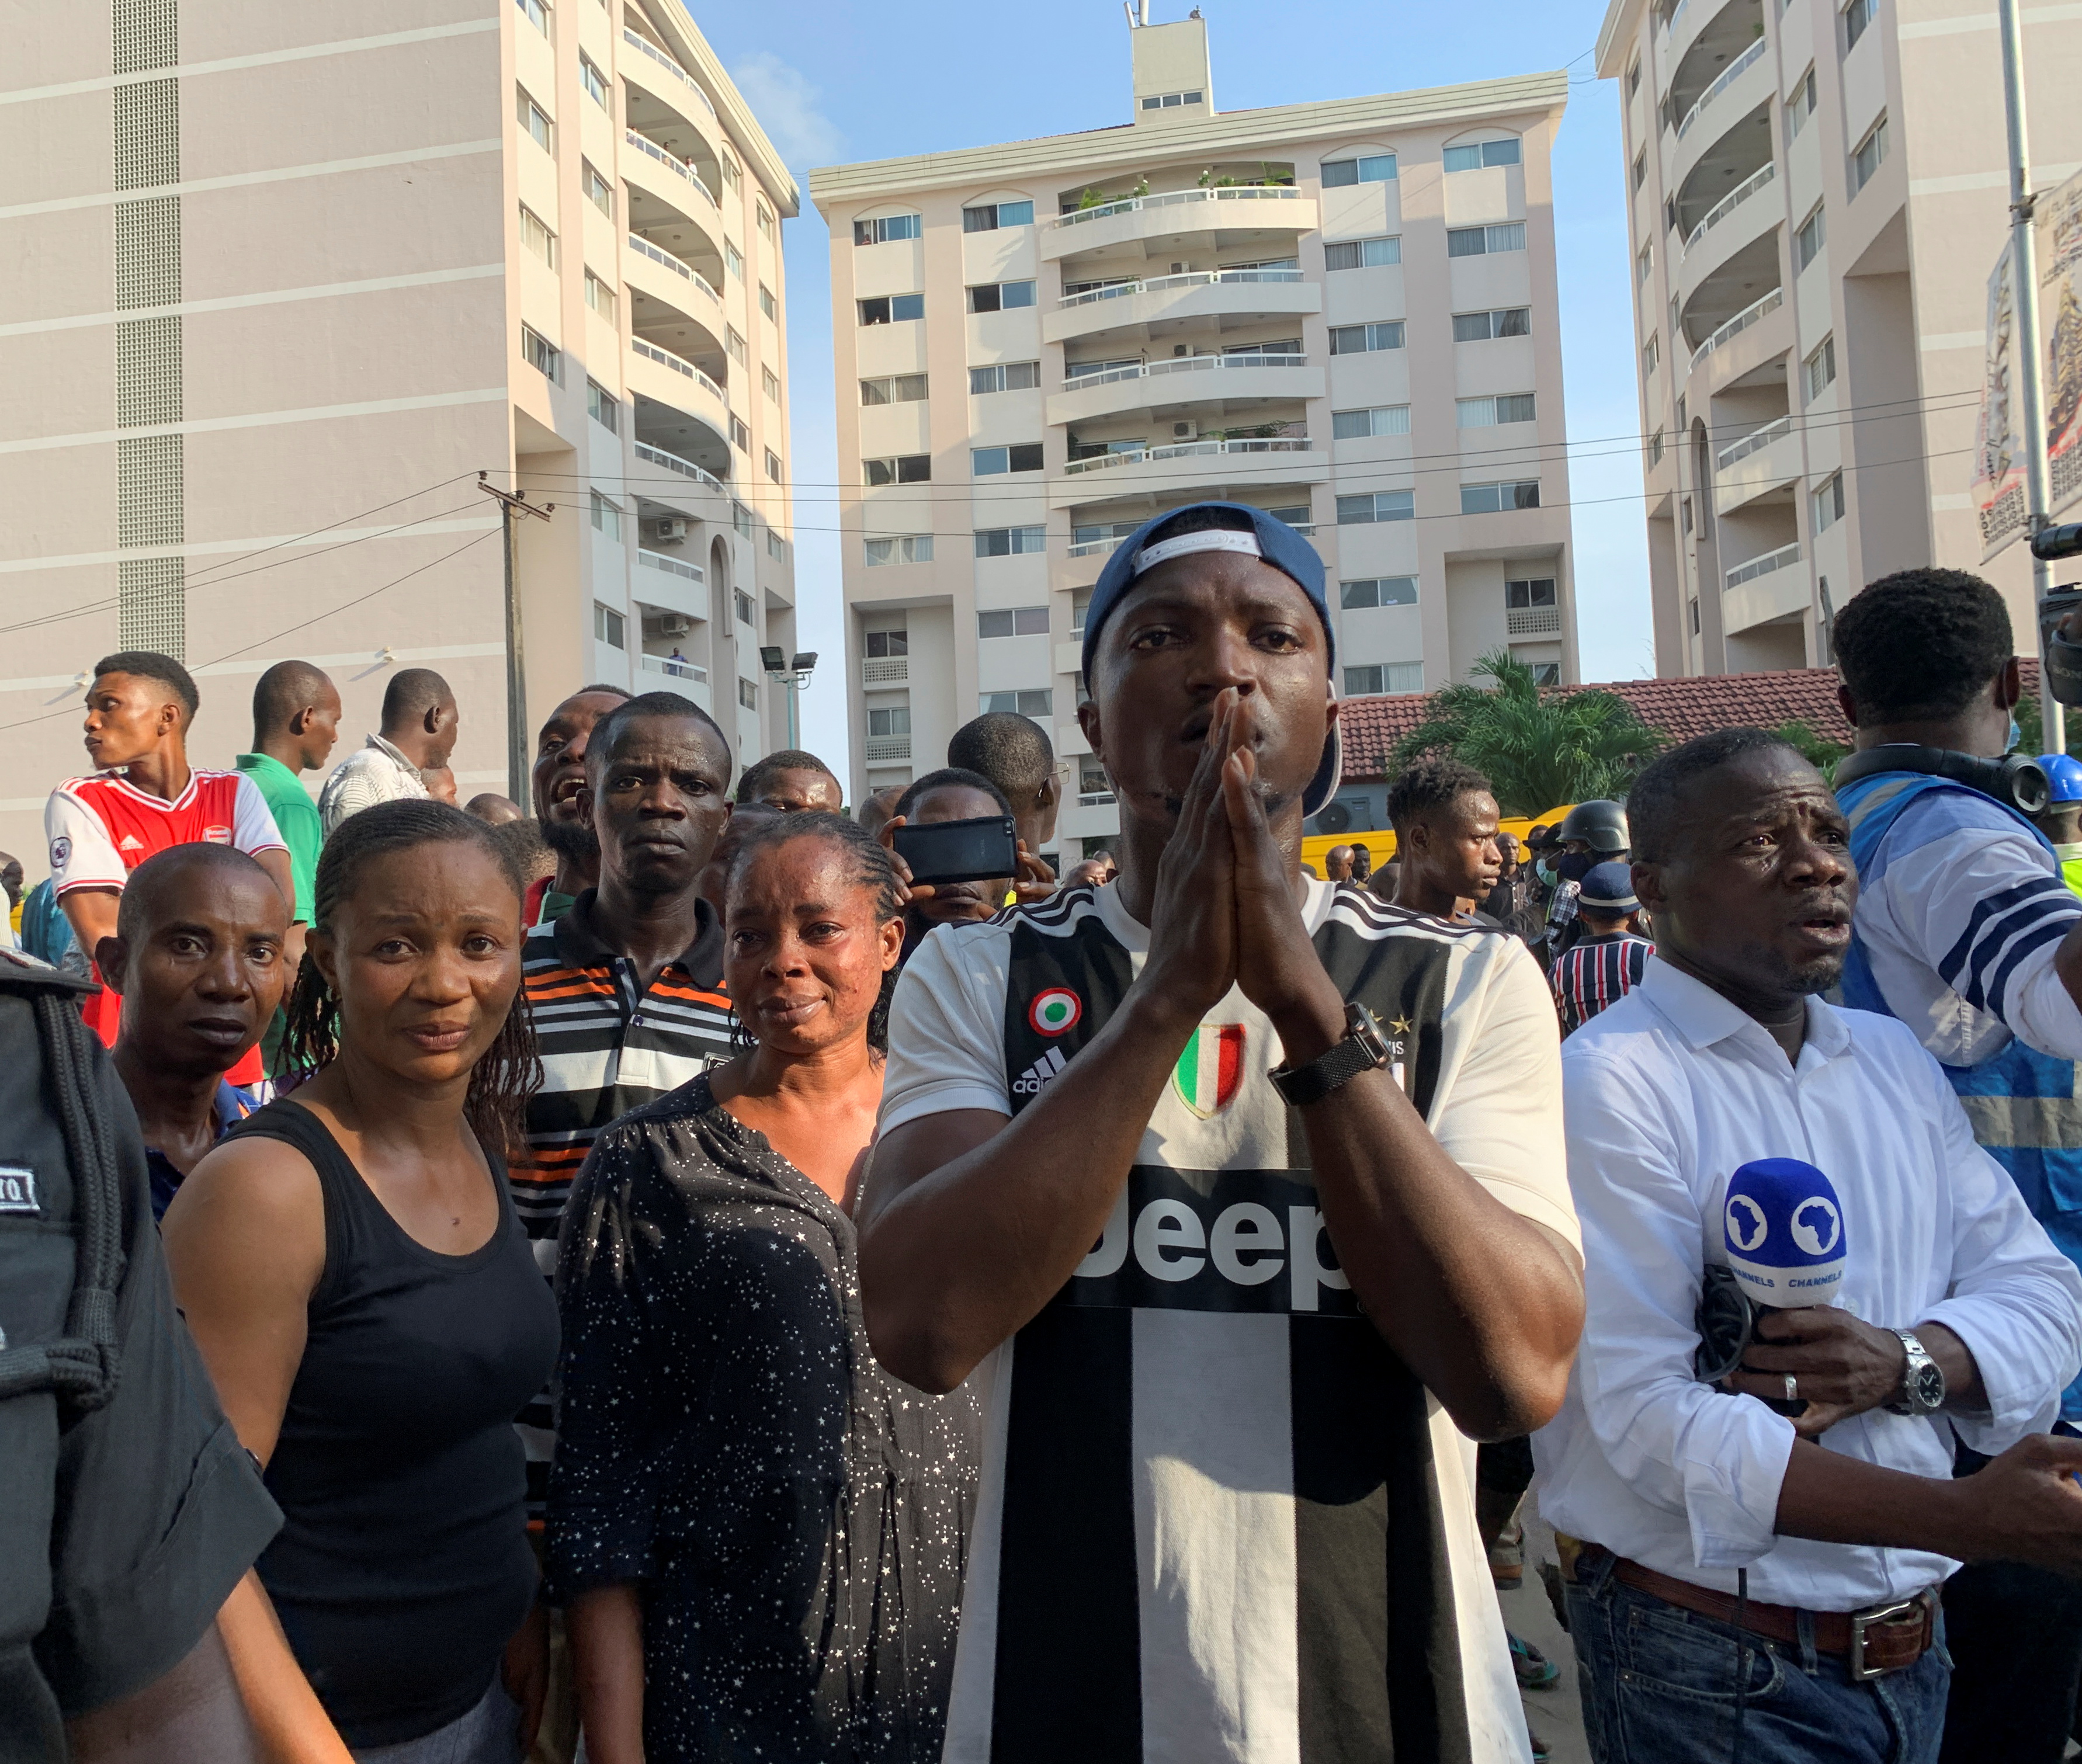 People react as they gather at the site of a collapsed building in Ikoyi, Lagos, Nigeria, November 1, 2021. REUTERS/Temilade Adelaja